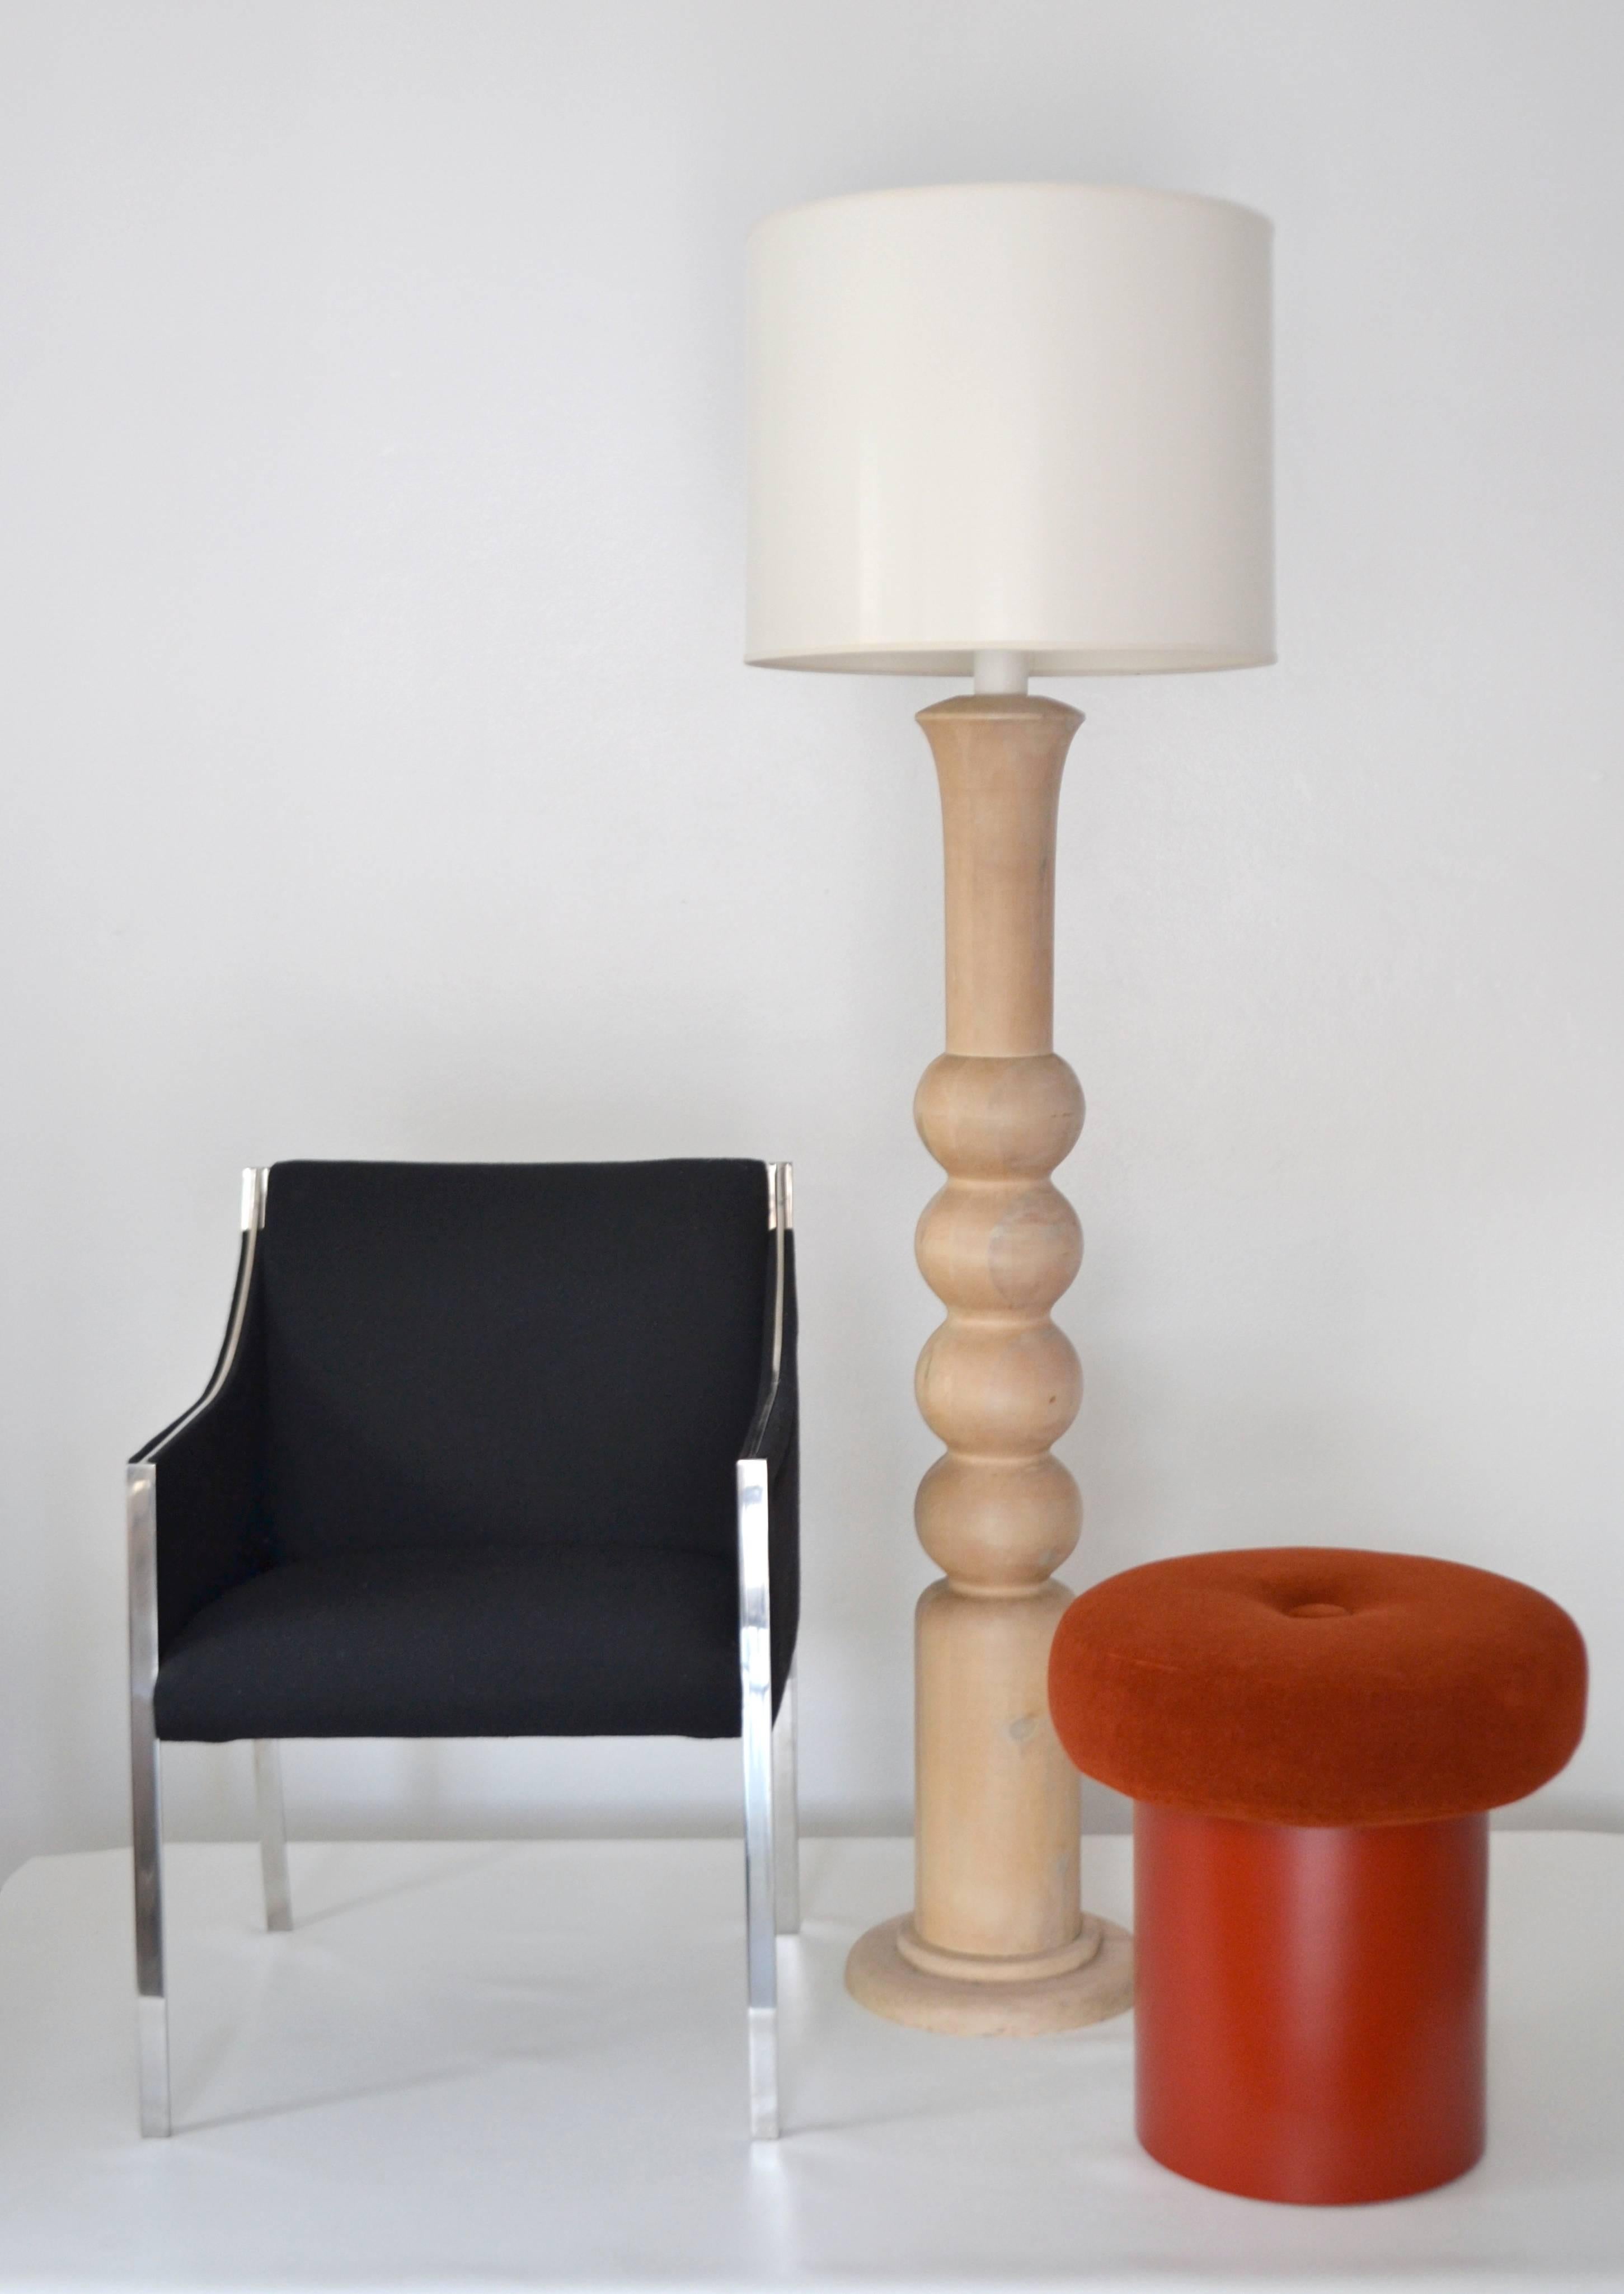 Striking Mid-Century natural turned wood candlestick floor lamp, circa 1950s-1960s. This sculptural artisan crafted hand-turned standing lamp is wired with brass fittings. Shade not included. 
Measurements: The height from the base to the top of the